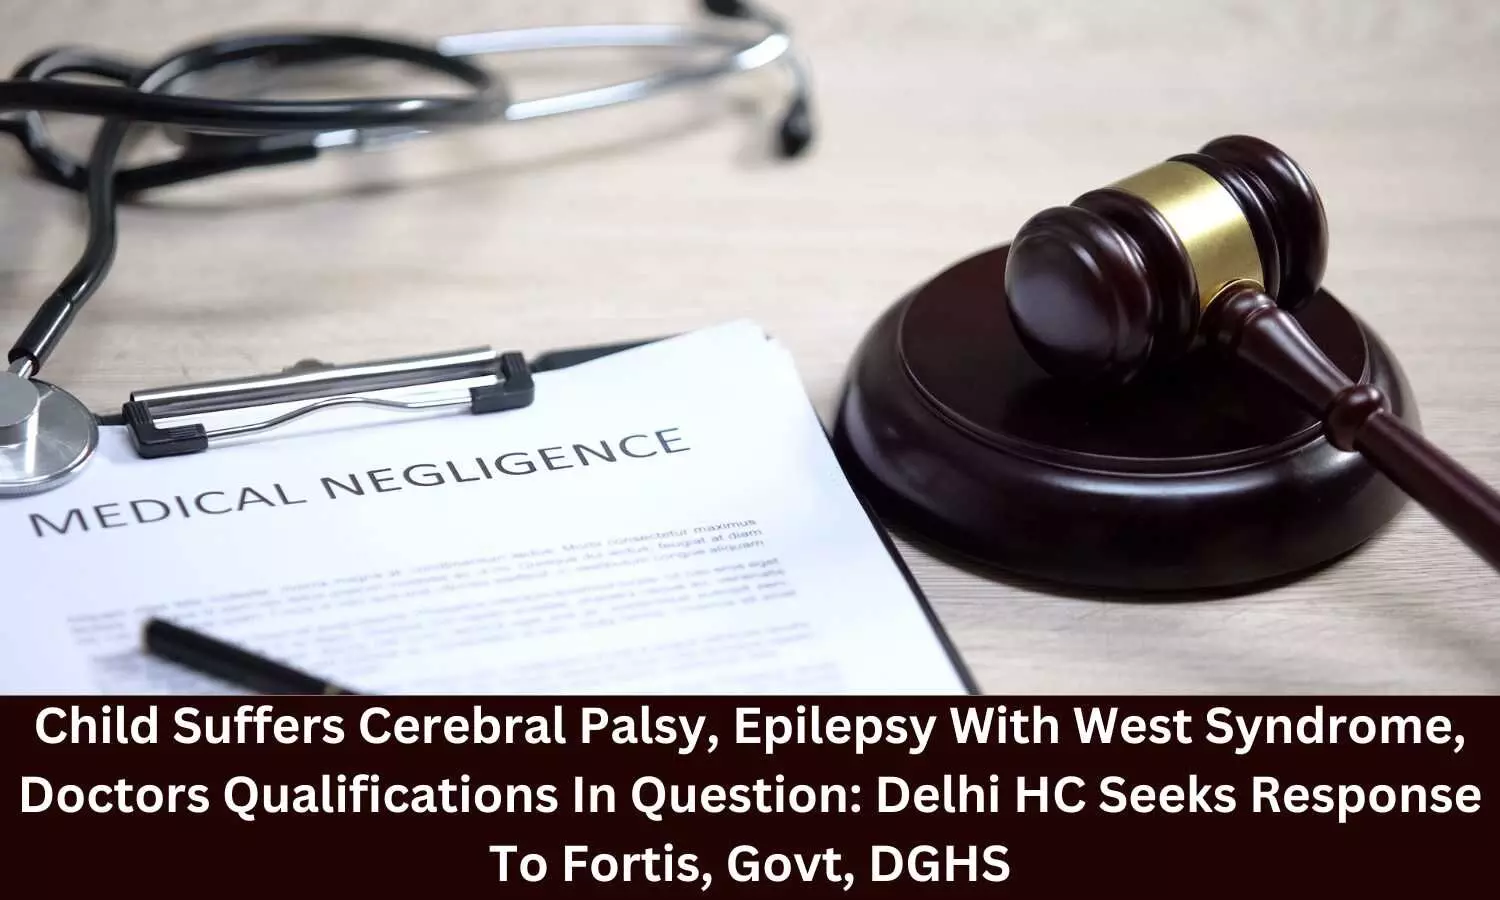 Child suffers cerebral palsy, epilepsy with west syndrome, doctors qualifications in question: Delhi HC seeks response to Fortis, Govt, DGHS